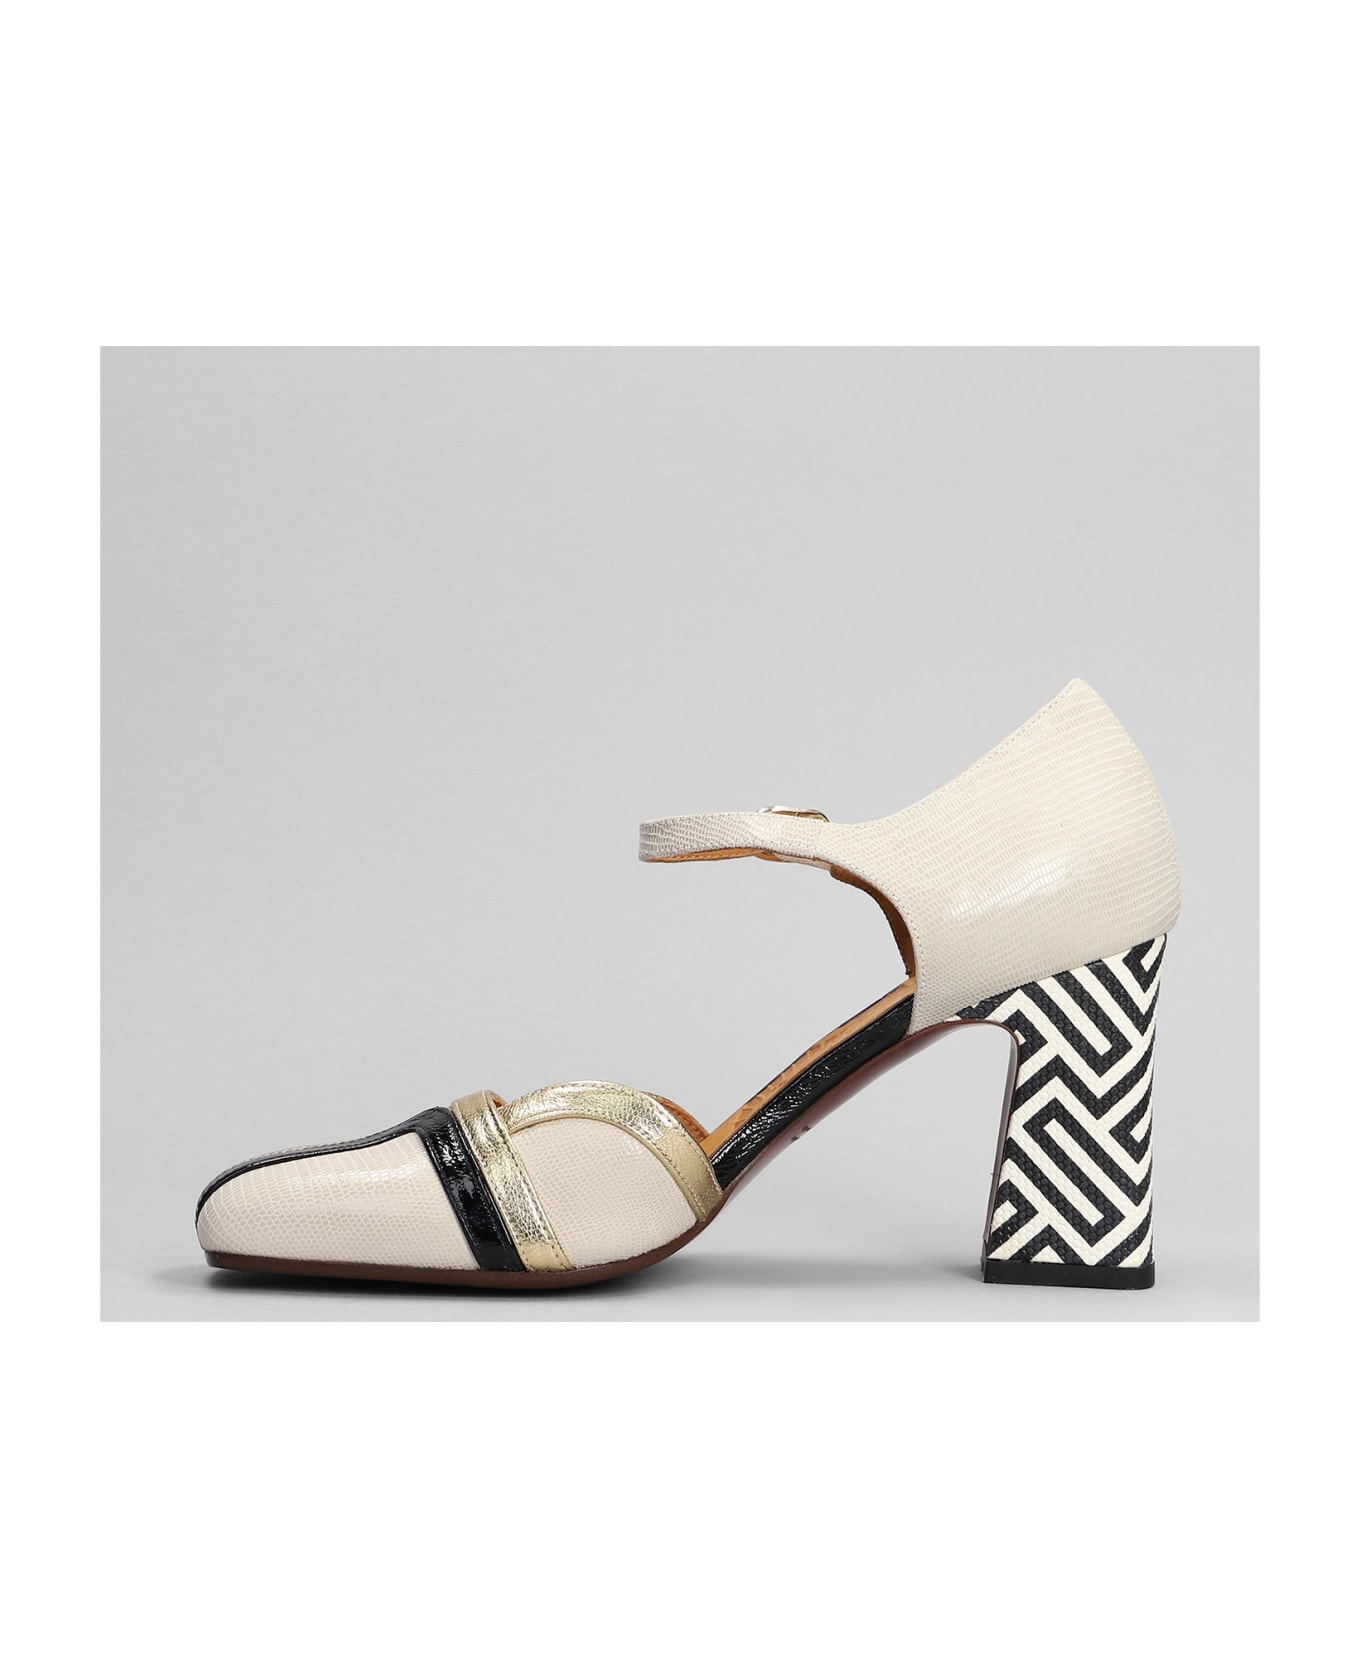 Chie Mihara Olali Pumps In Beige Leather - beige ハイヒール